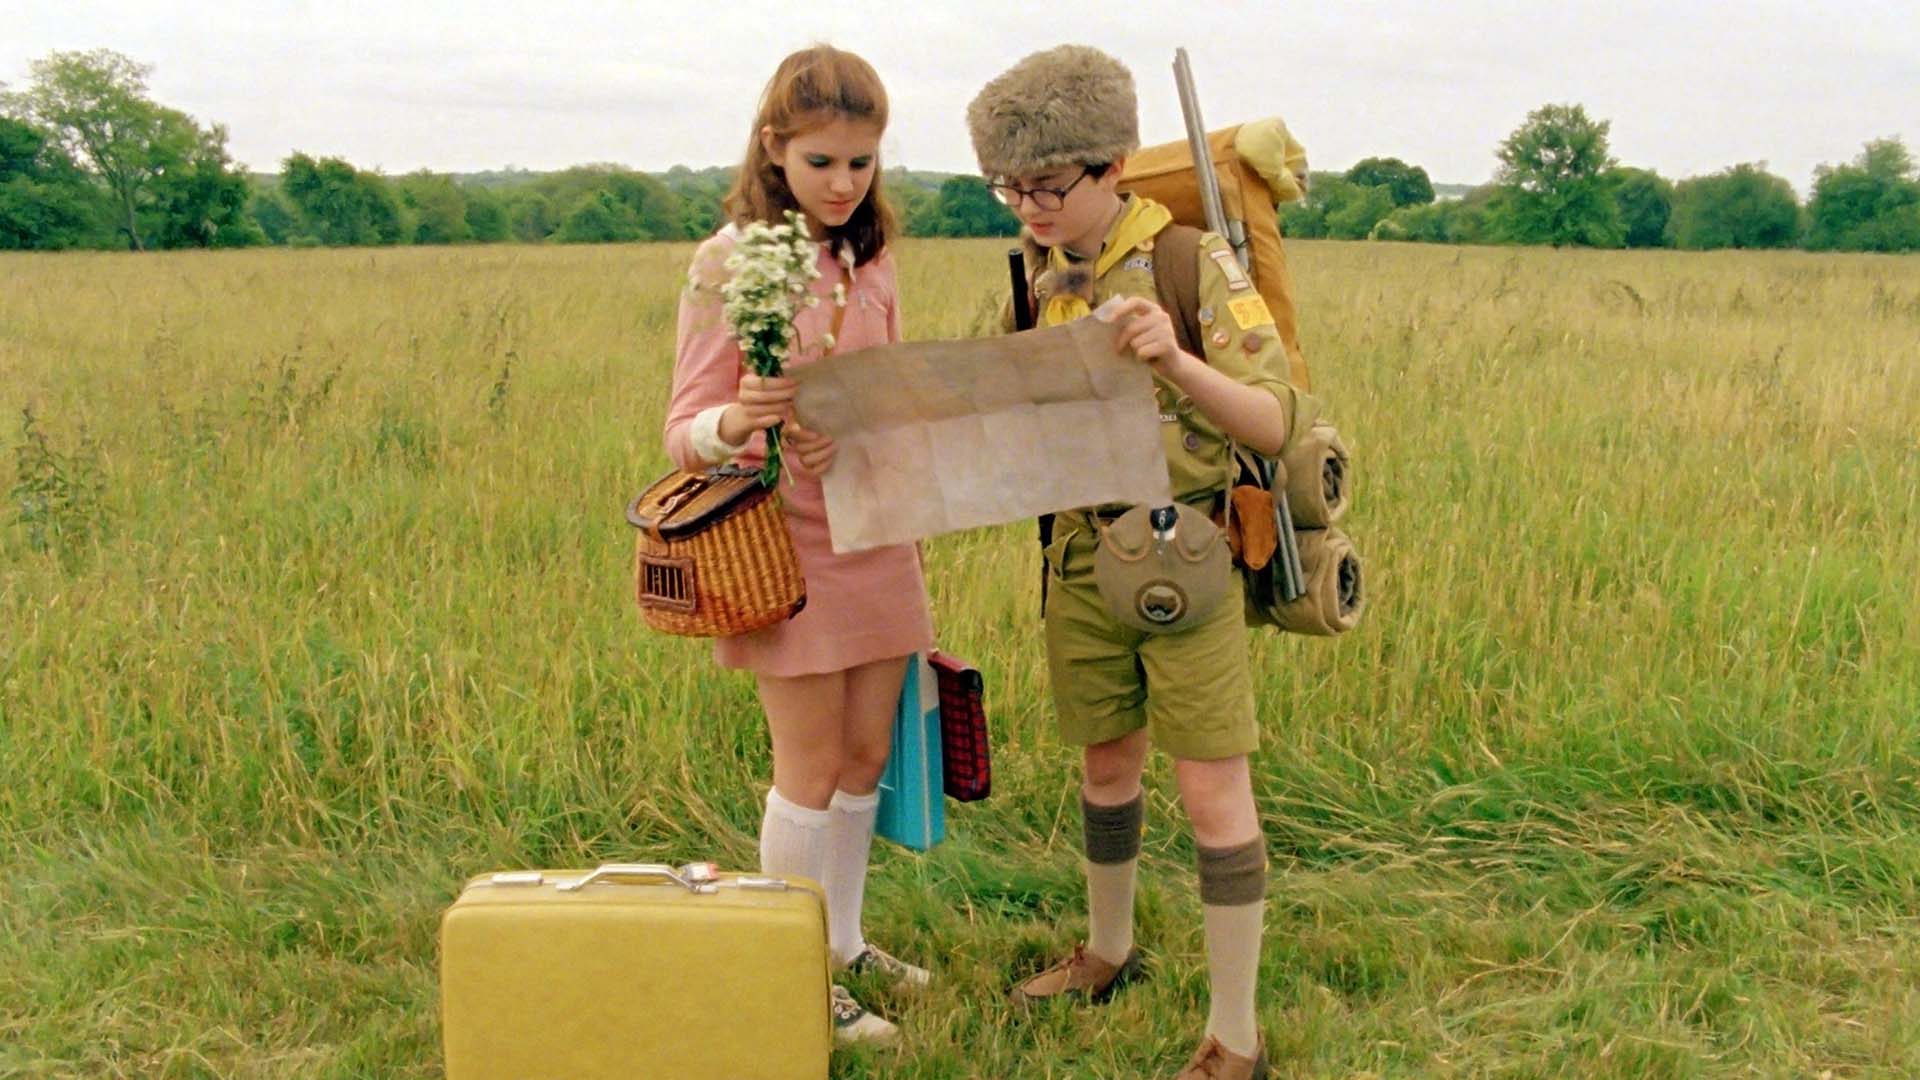 Wes Anderson's 1950s-Set New Film 'Asteroid City' Will Bring Its Symmetry to Cinemas in 2023